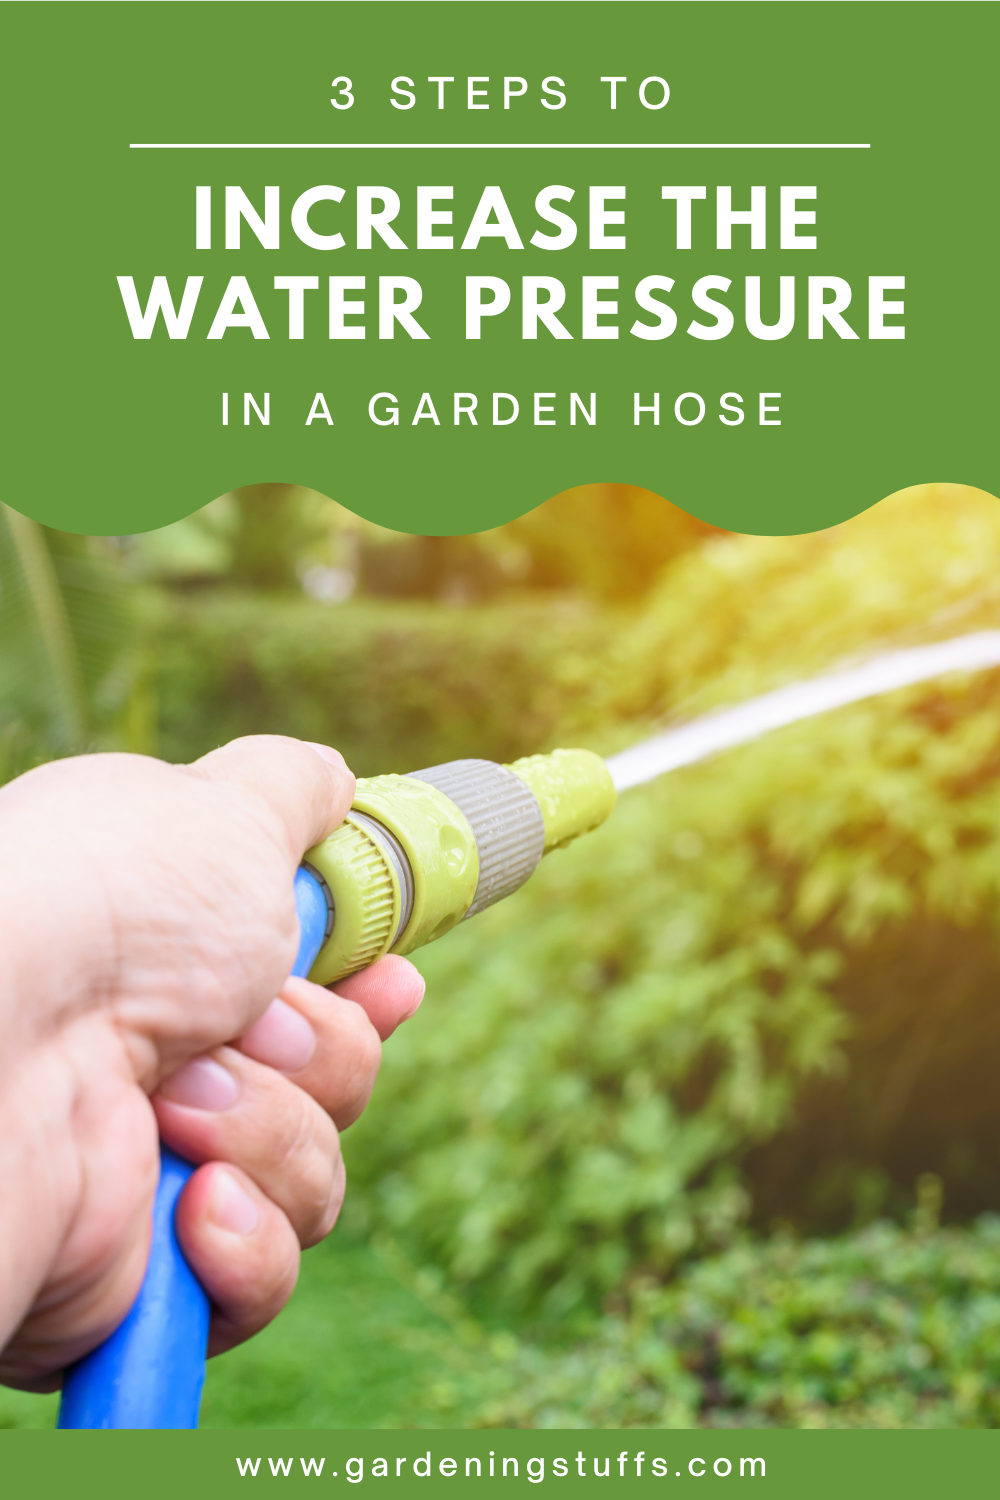 The advantage of the increased pressure can vary from decreased efforts to a cleaner area. It depends on what you really wish to use for. Check out these quick 3 steps and easy to follow.